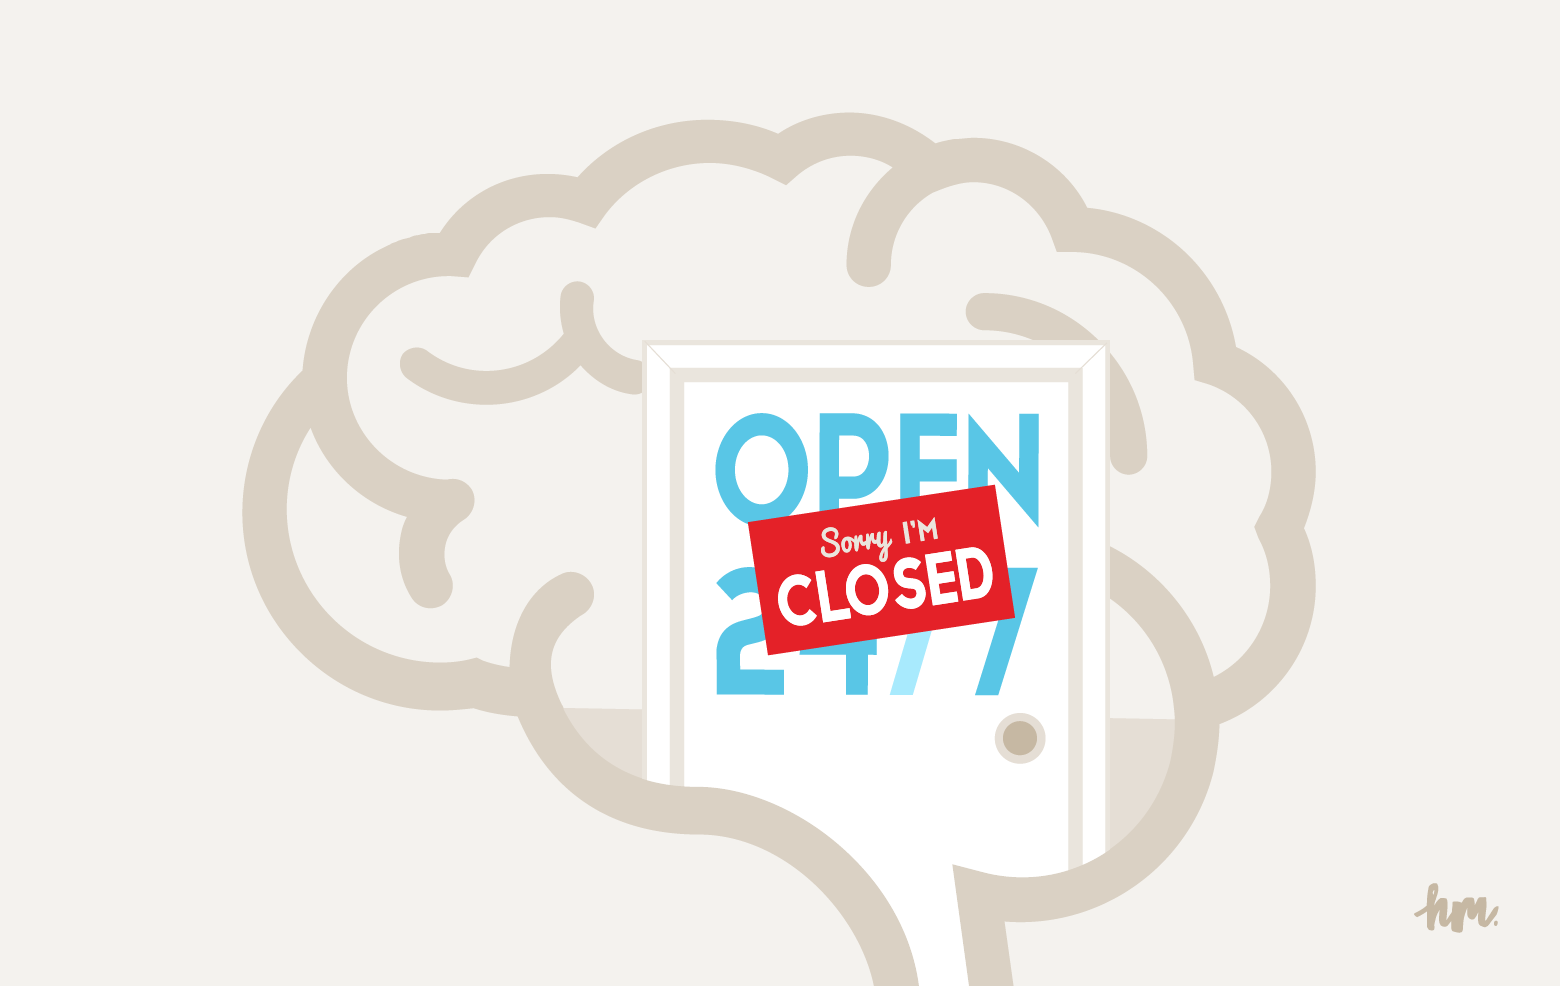 Illustration of a brain with a door marked "Open 24/7" but with a sign over it stating, "Sorry I'm Closed."